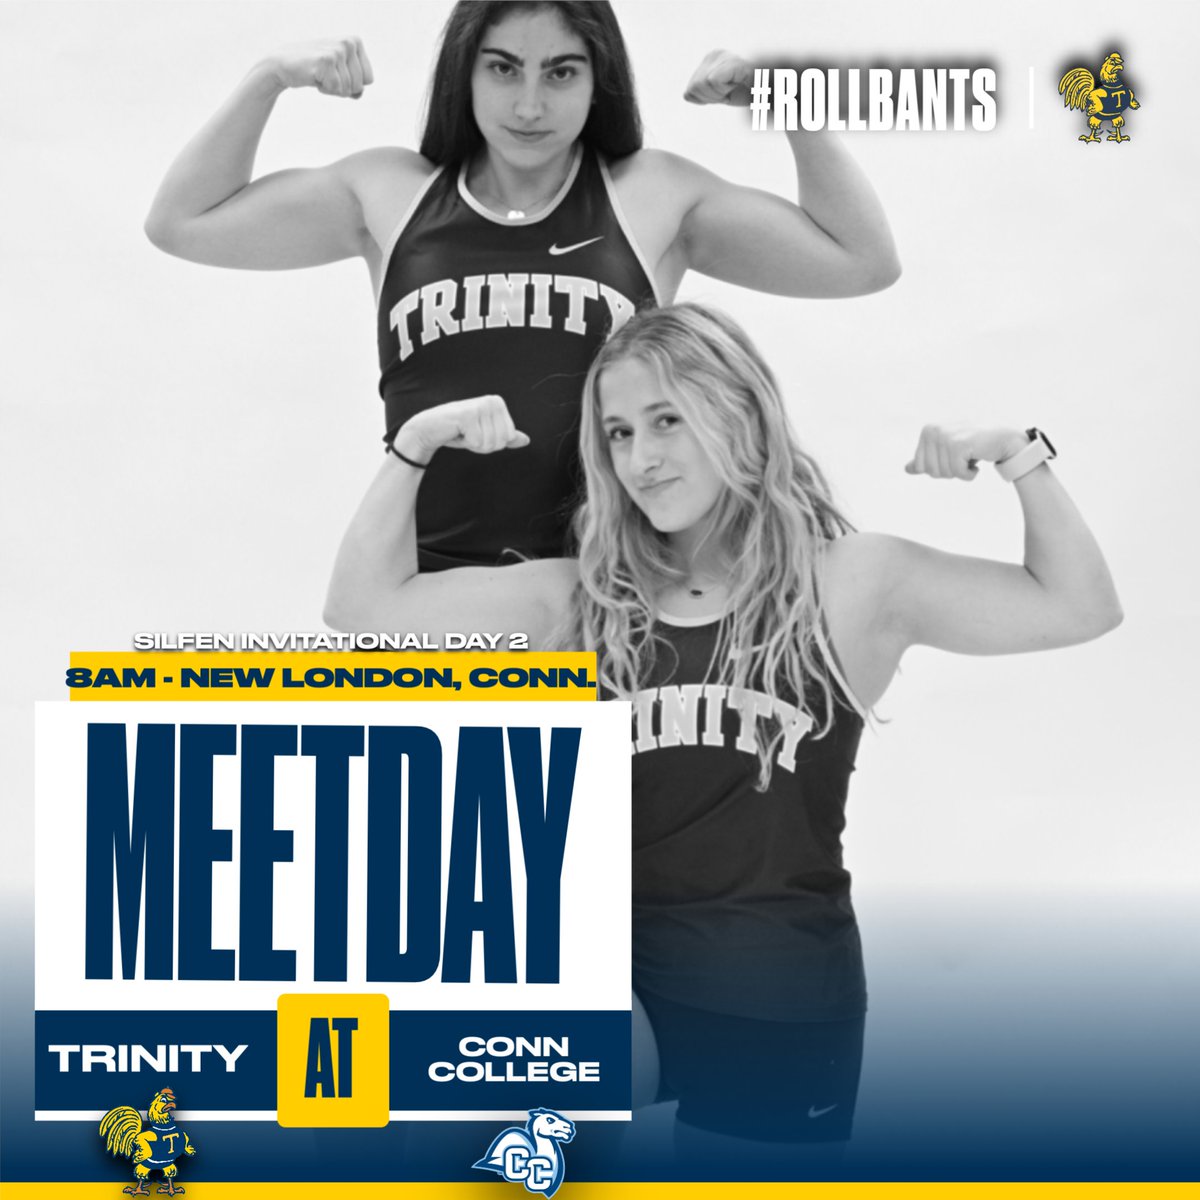 M&W 🏃‍♀️🏃| @TrincollTrack Will compete in day two of the Silfen Invitational hosted by Connecticut College, events begin at 8AM! 📊 live.harrierrace.com/meets/33570 📺 nsnsports.net/colleges/conne… #RollBants